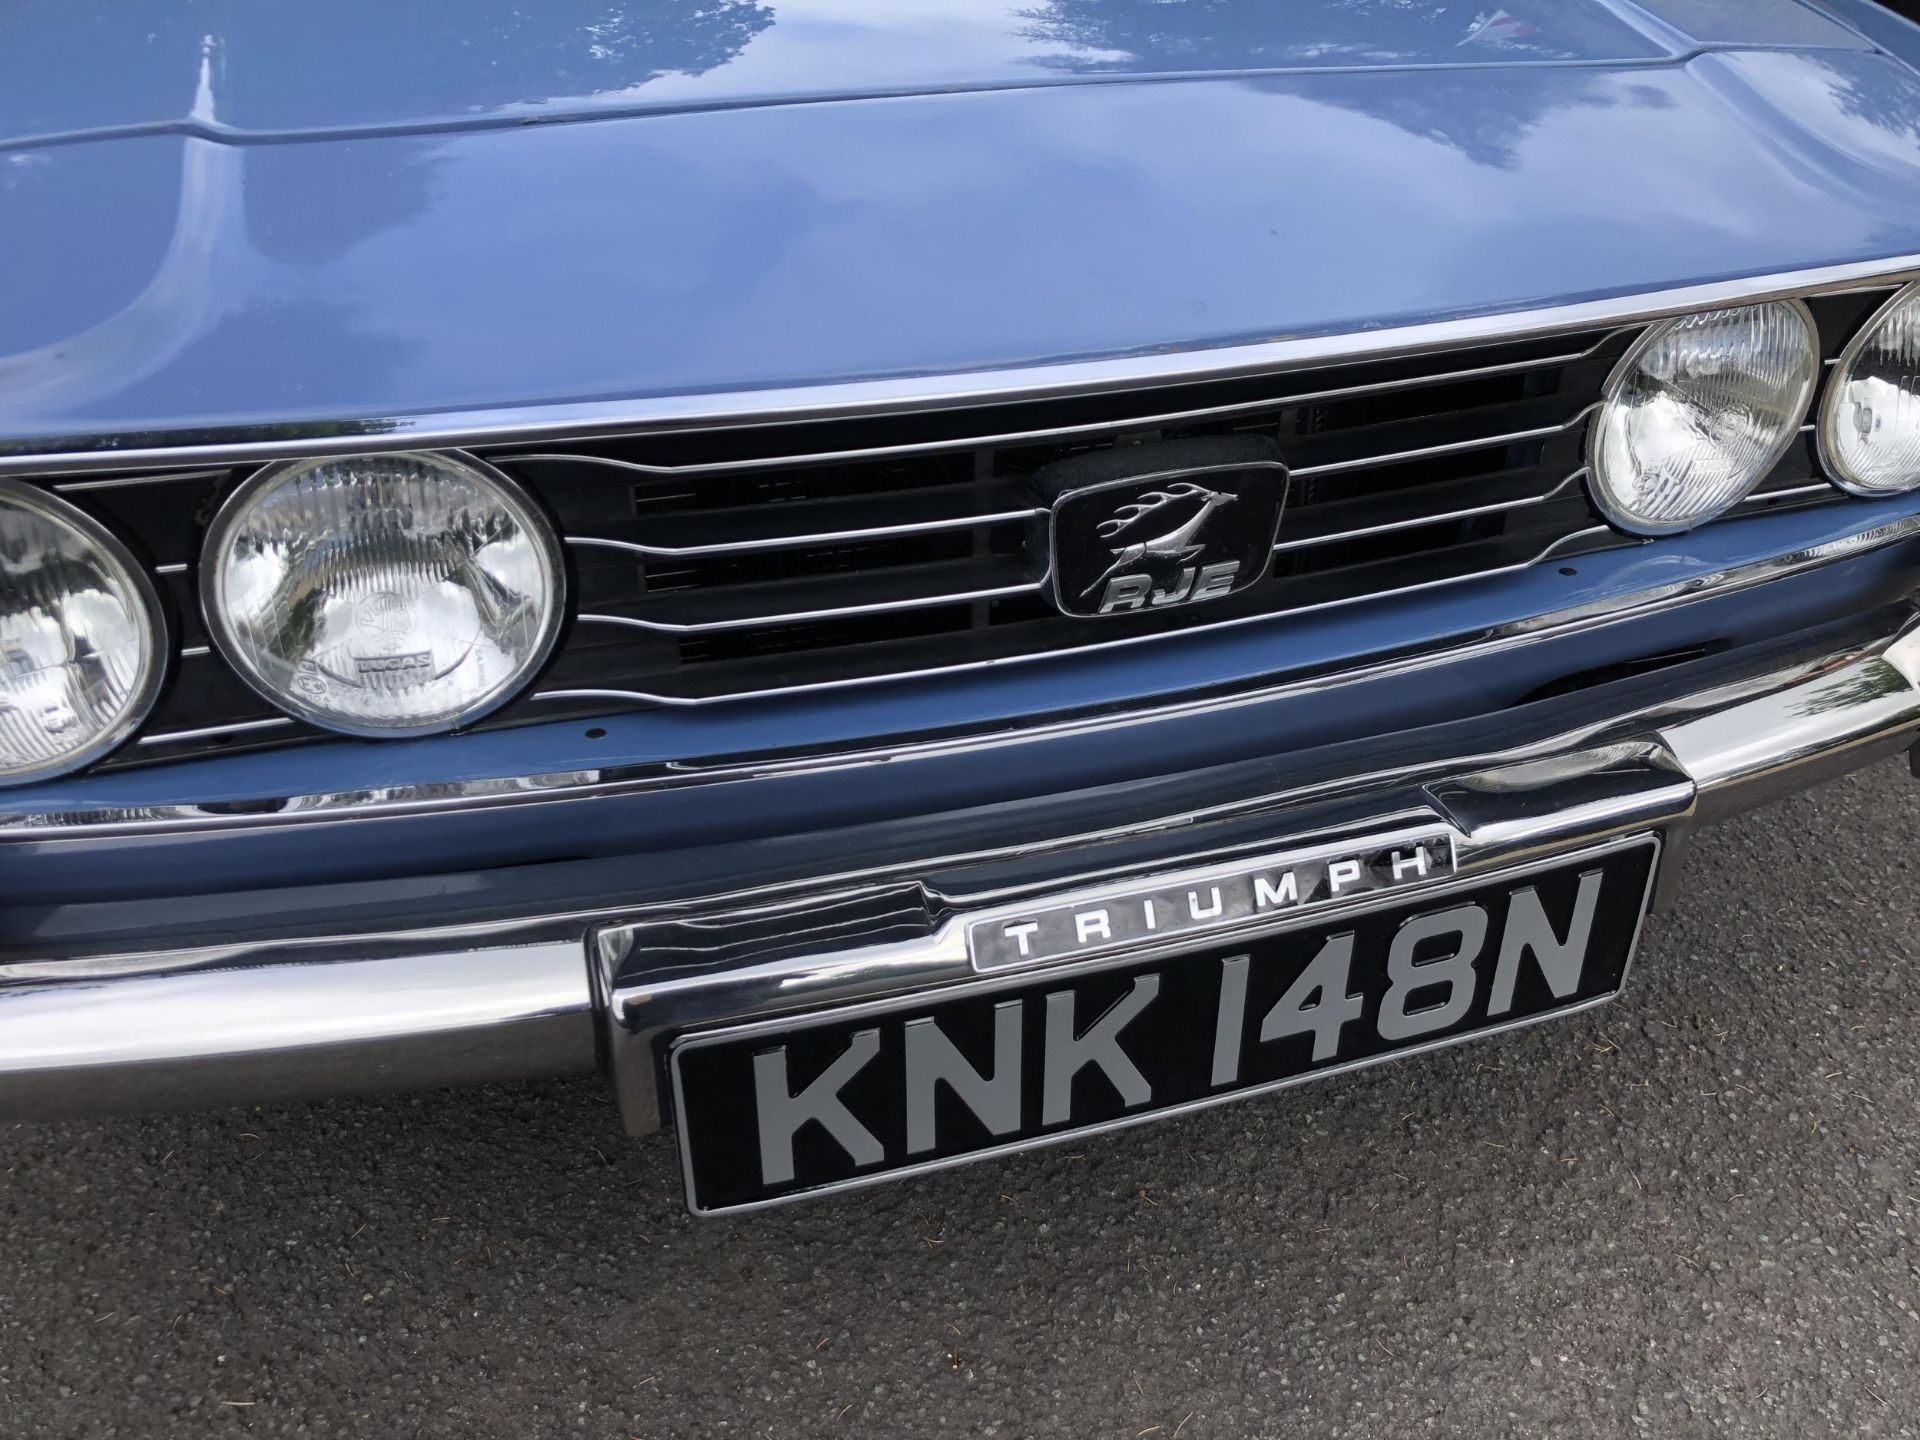 1975 Triumph Stag Registration number KNK 148N French blue with a black interior Automatic Gearbox - Image 37 of 57